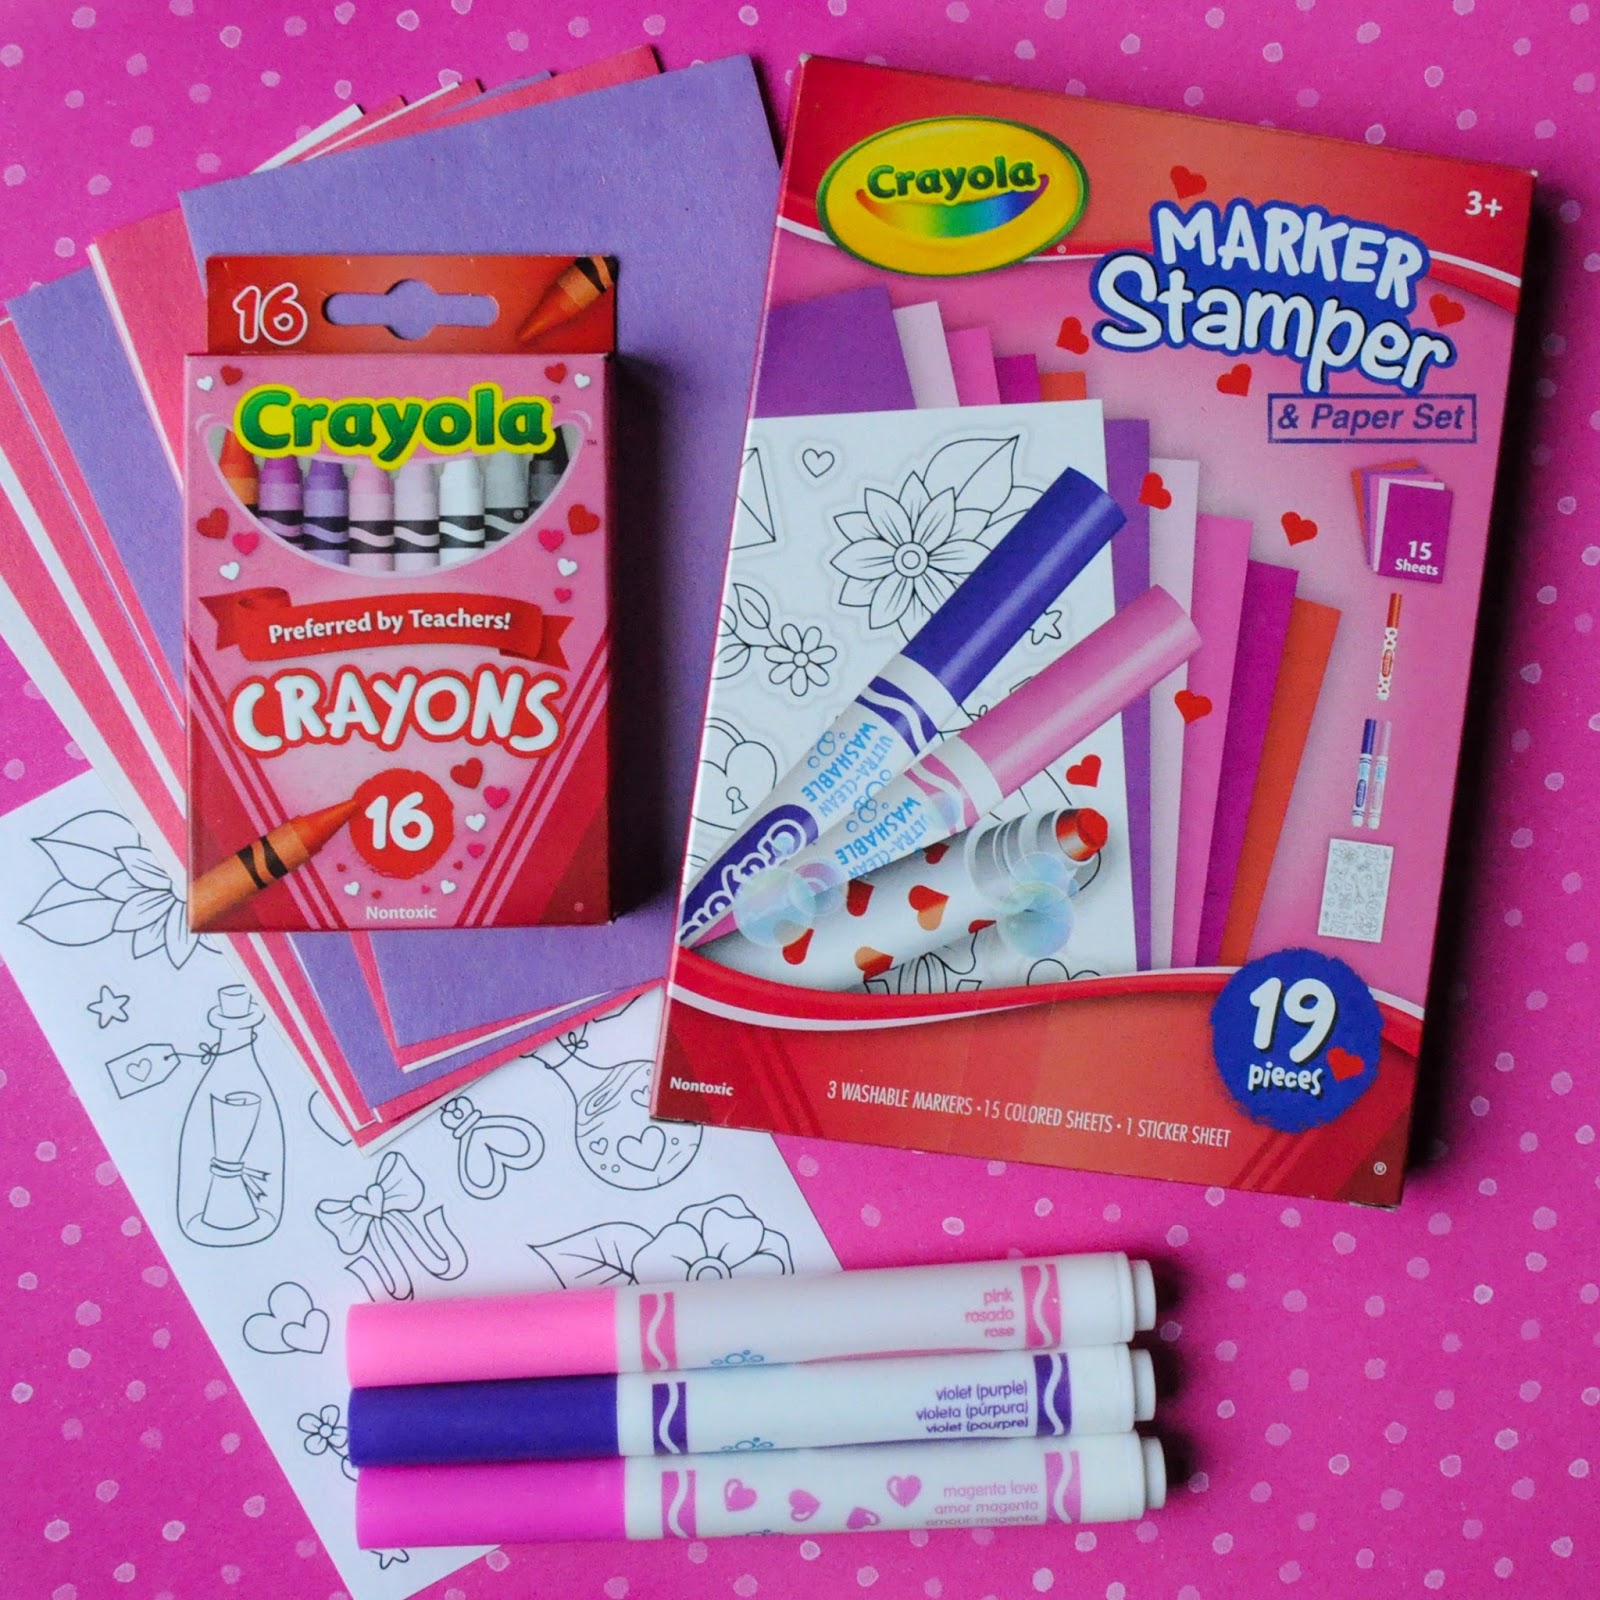 Crayola Valentine's Collection: What's Inside the Box | Jenny's Crayon